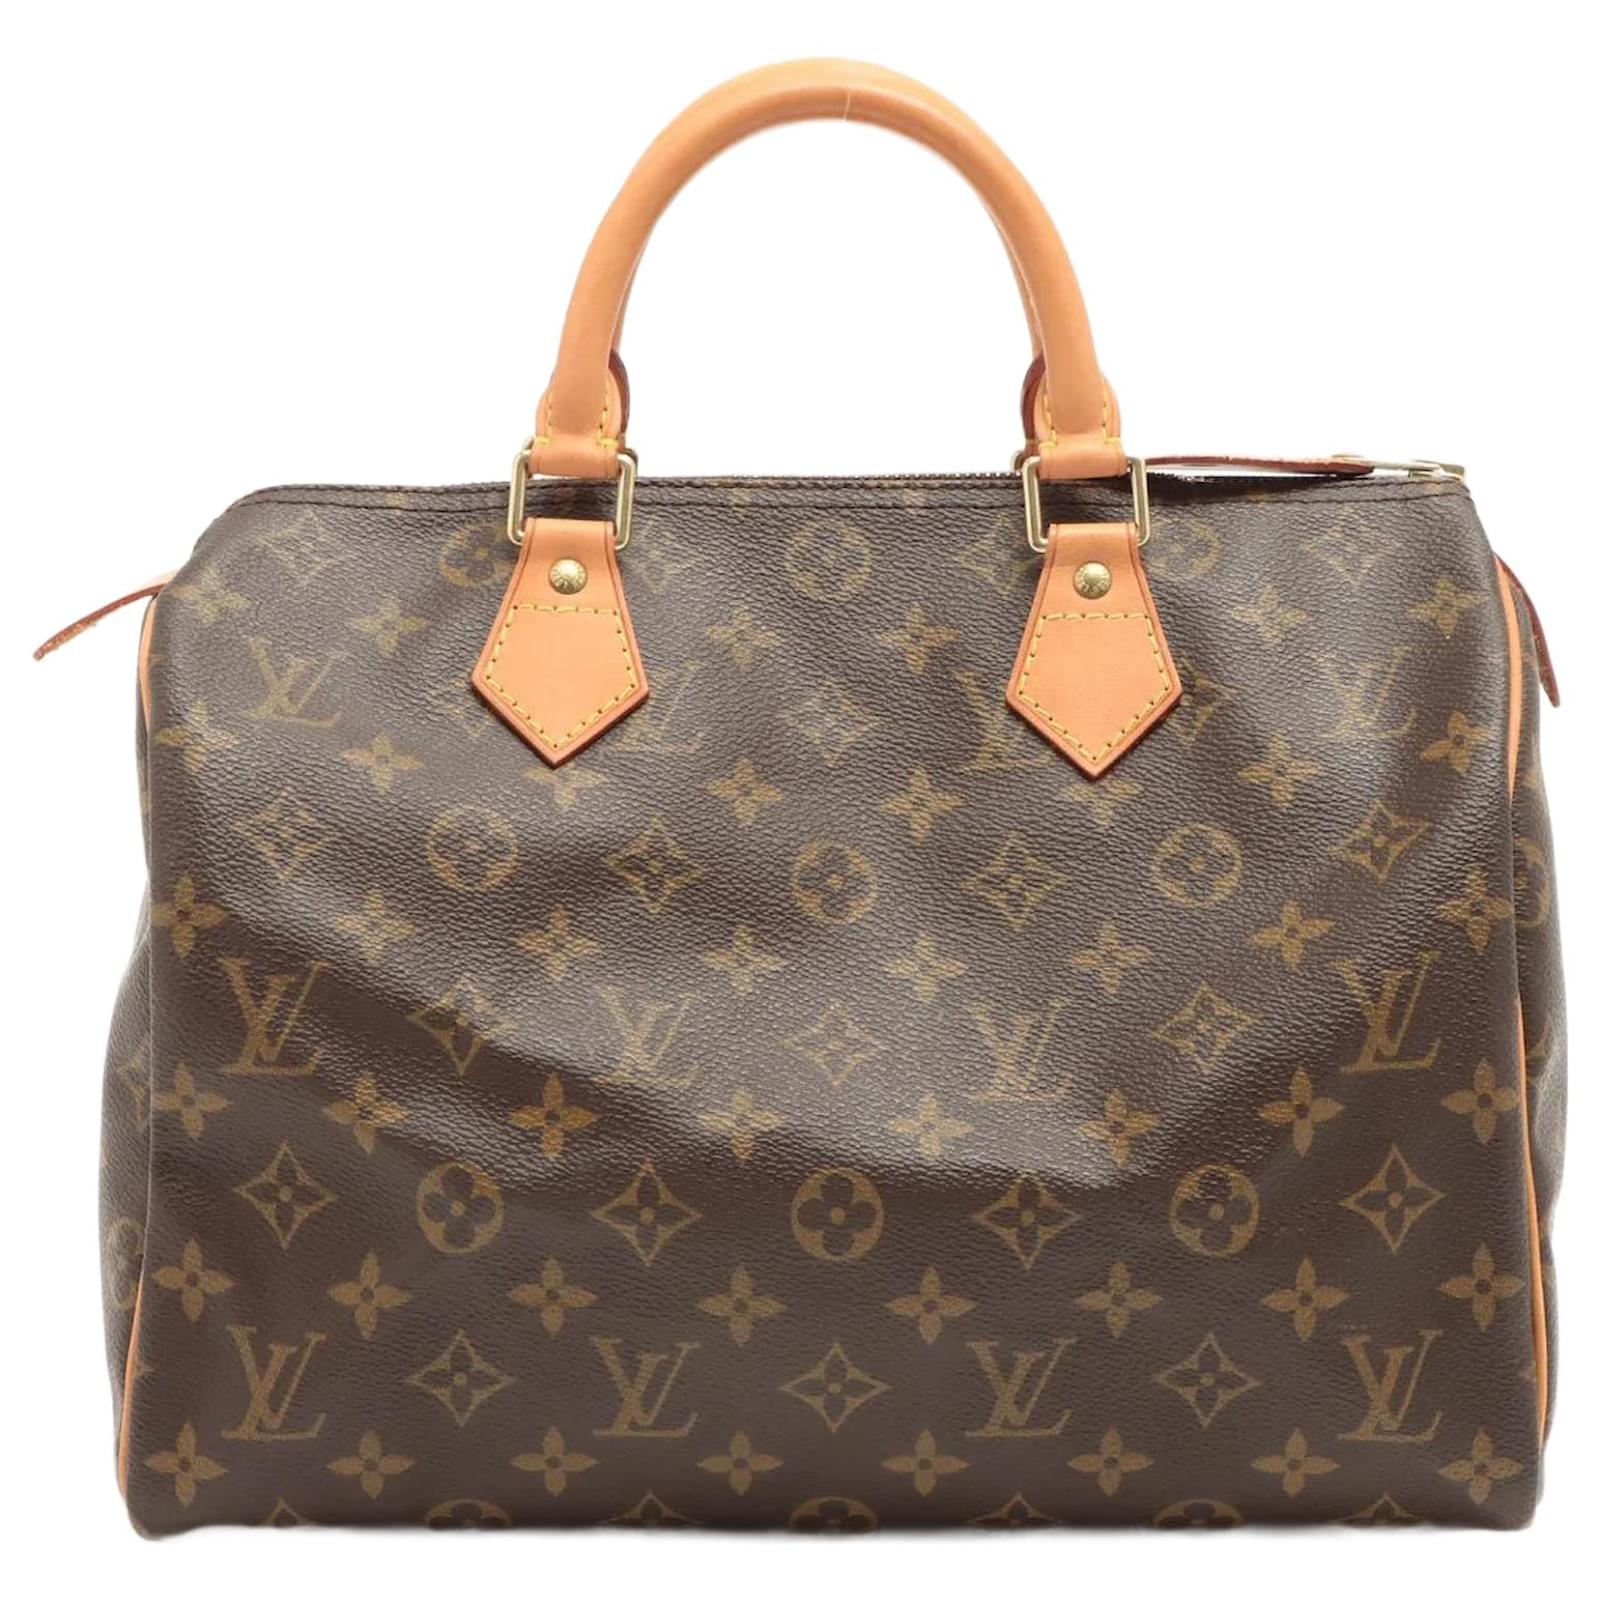 How to clean a Louis Vuitton bag and keep it in pristine condition